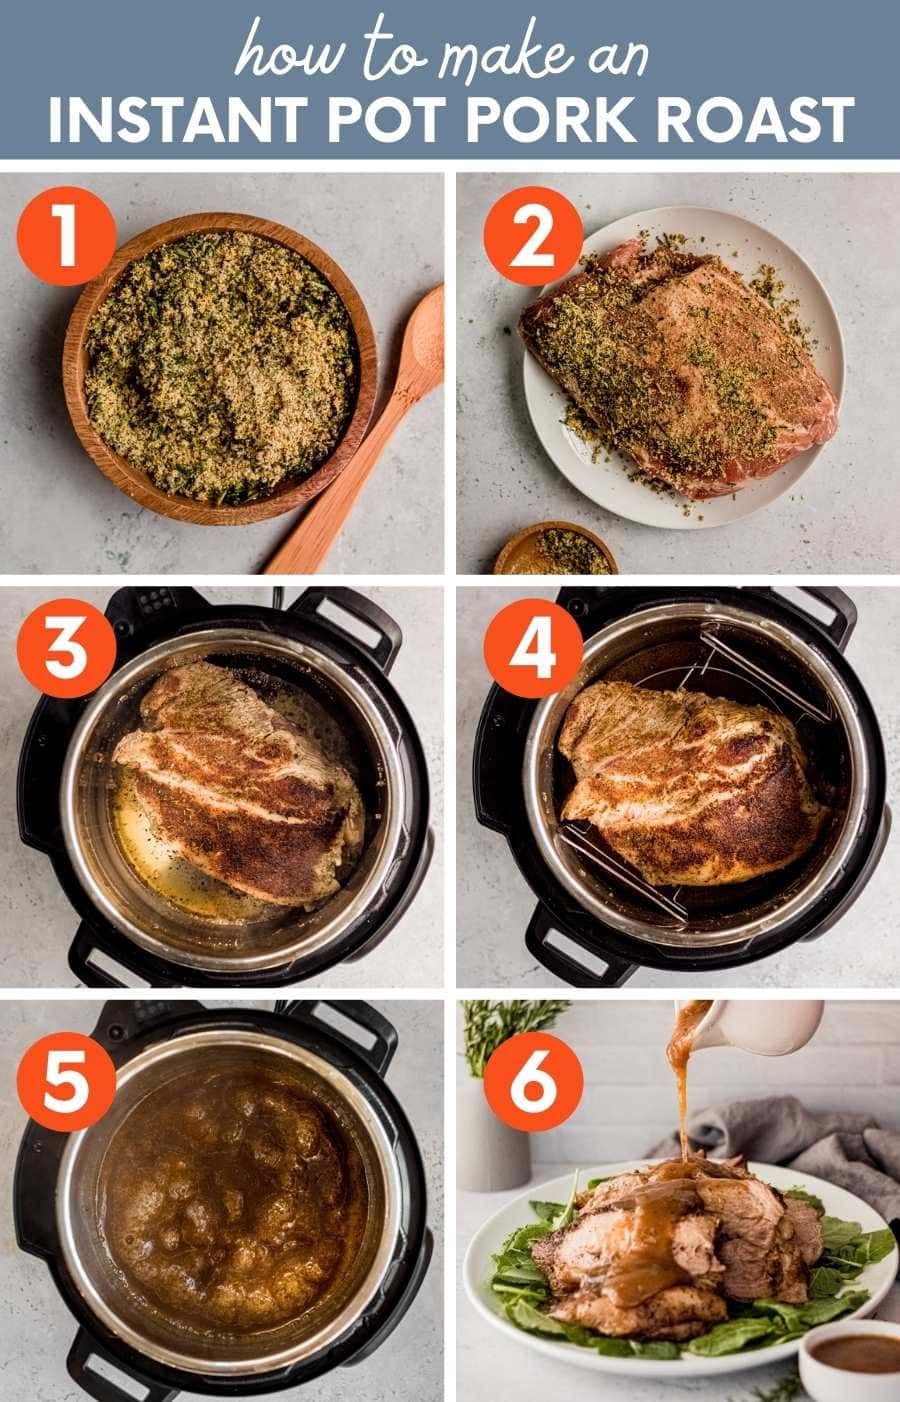 Collage showing six easy steps to make instant pot pork roast. A text overlay reads, "How to make an Instant Pot Pork Roast."